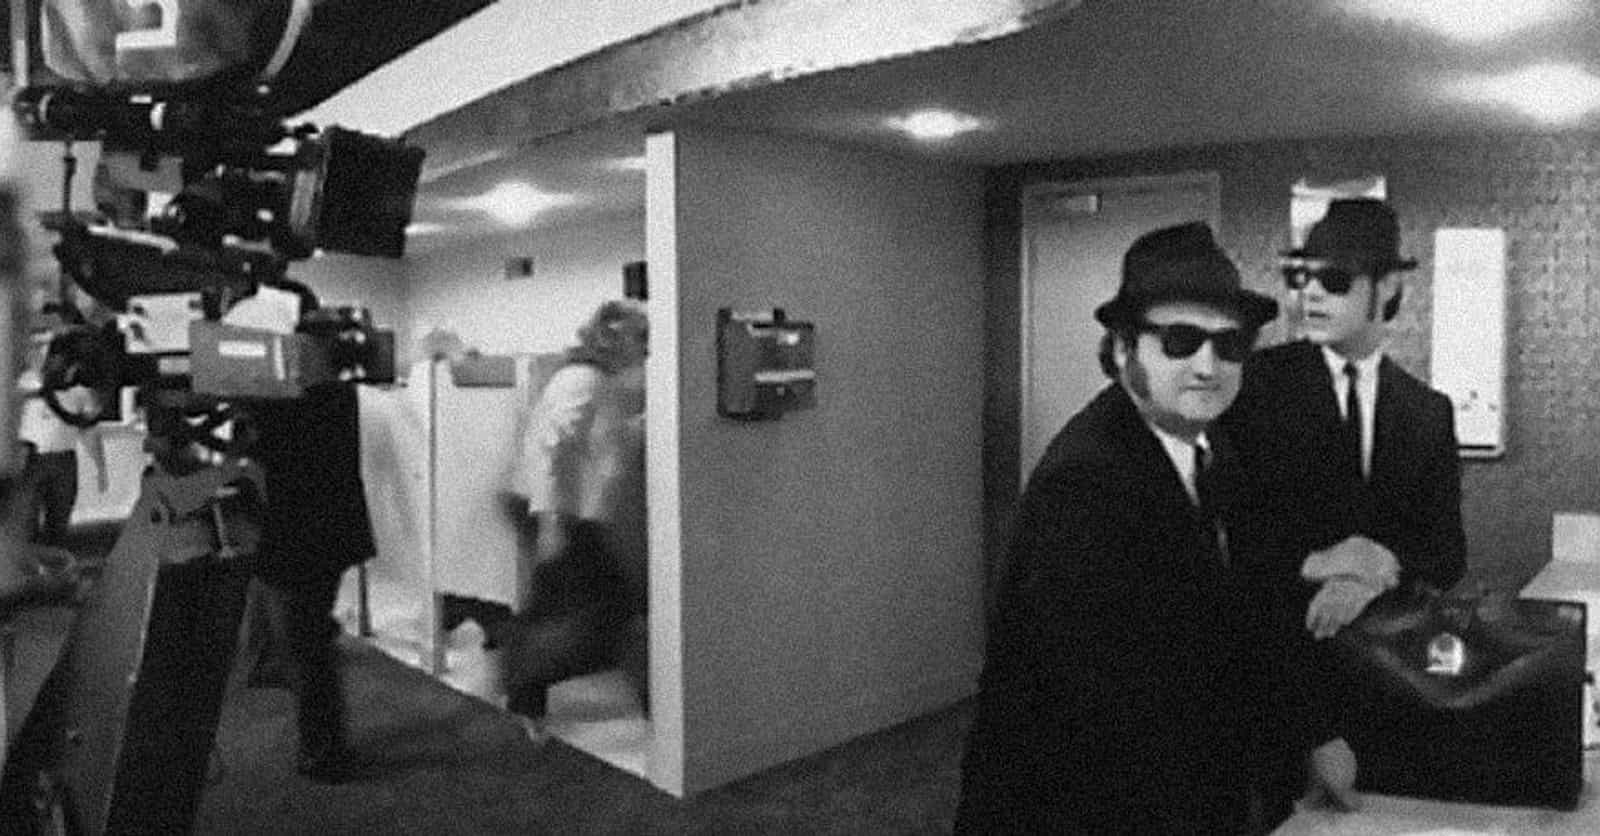 The Drug-Fueled Mayhem Behind The Scenes Of 'The Blues Brothers' Almost Destroyed The Movie